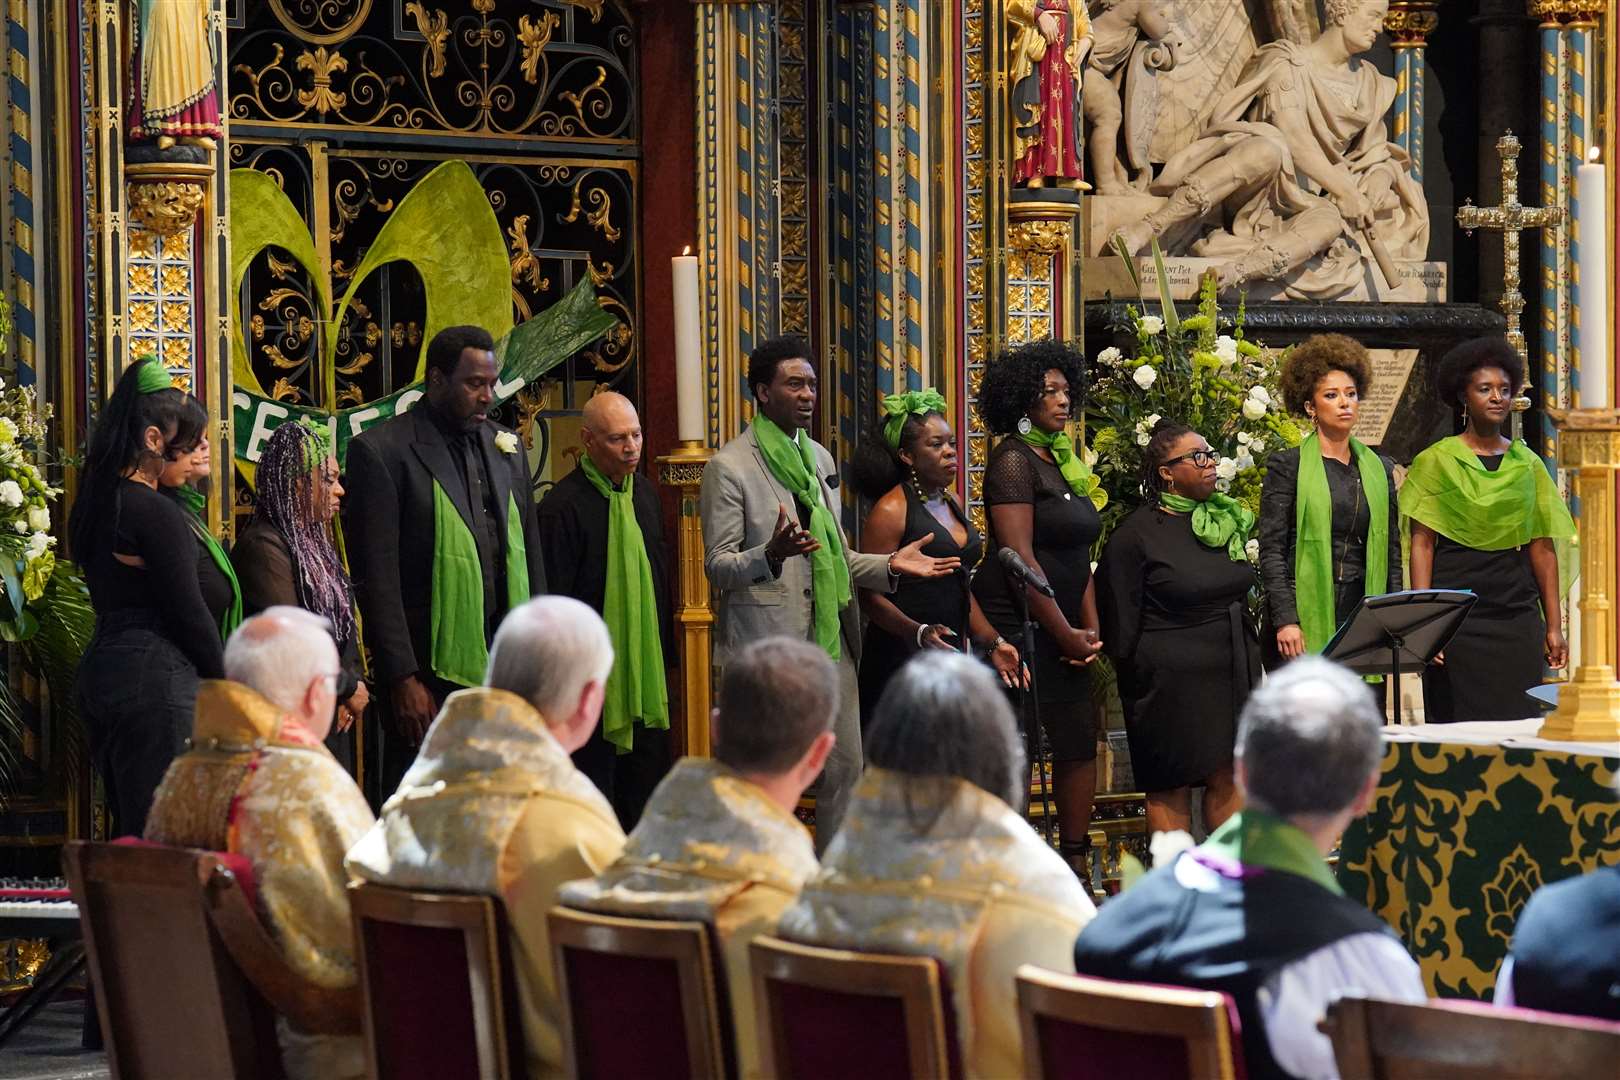 A community choir performed at the service, five years on from the deadliest domestic blaze since the Second World War (Jonathan Brady/PA)